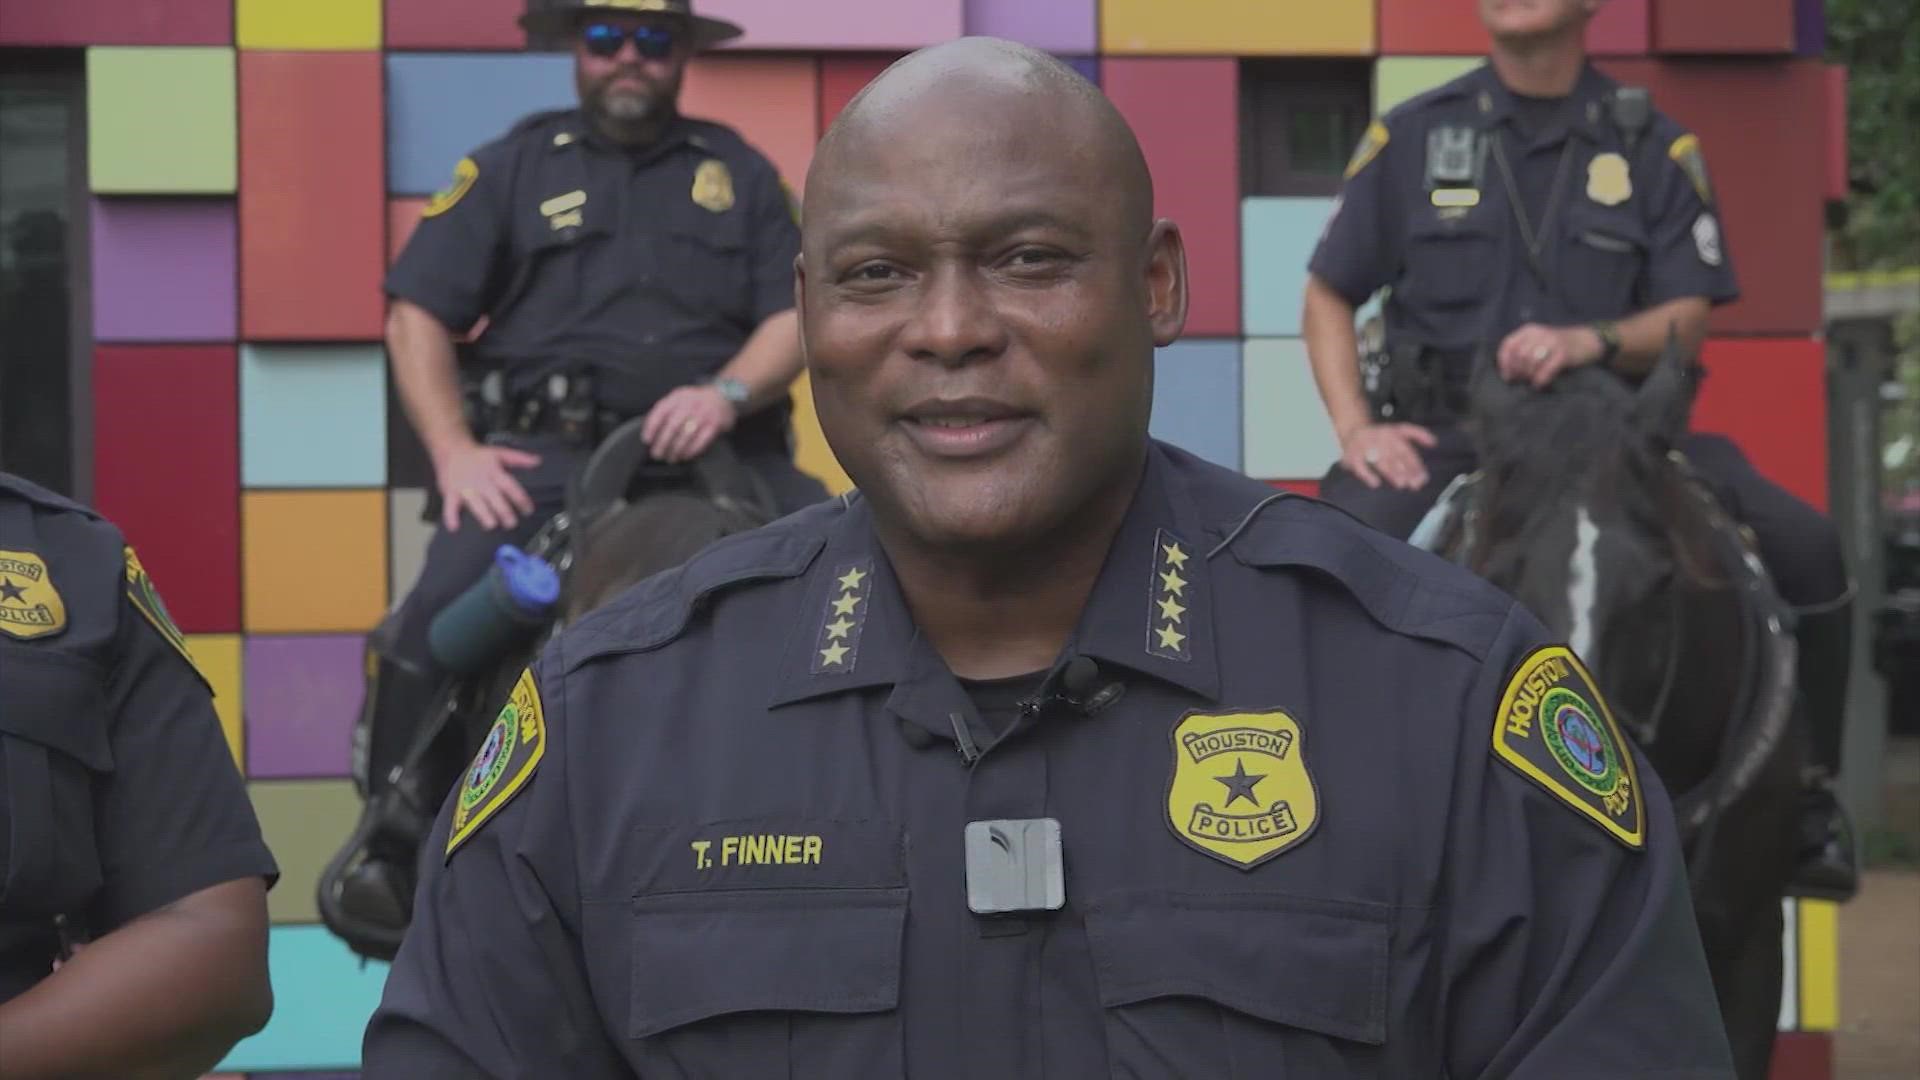 Saturday, the Houston Police Department held its first-ever hiring expo at Discovery Green.